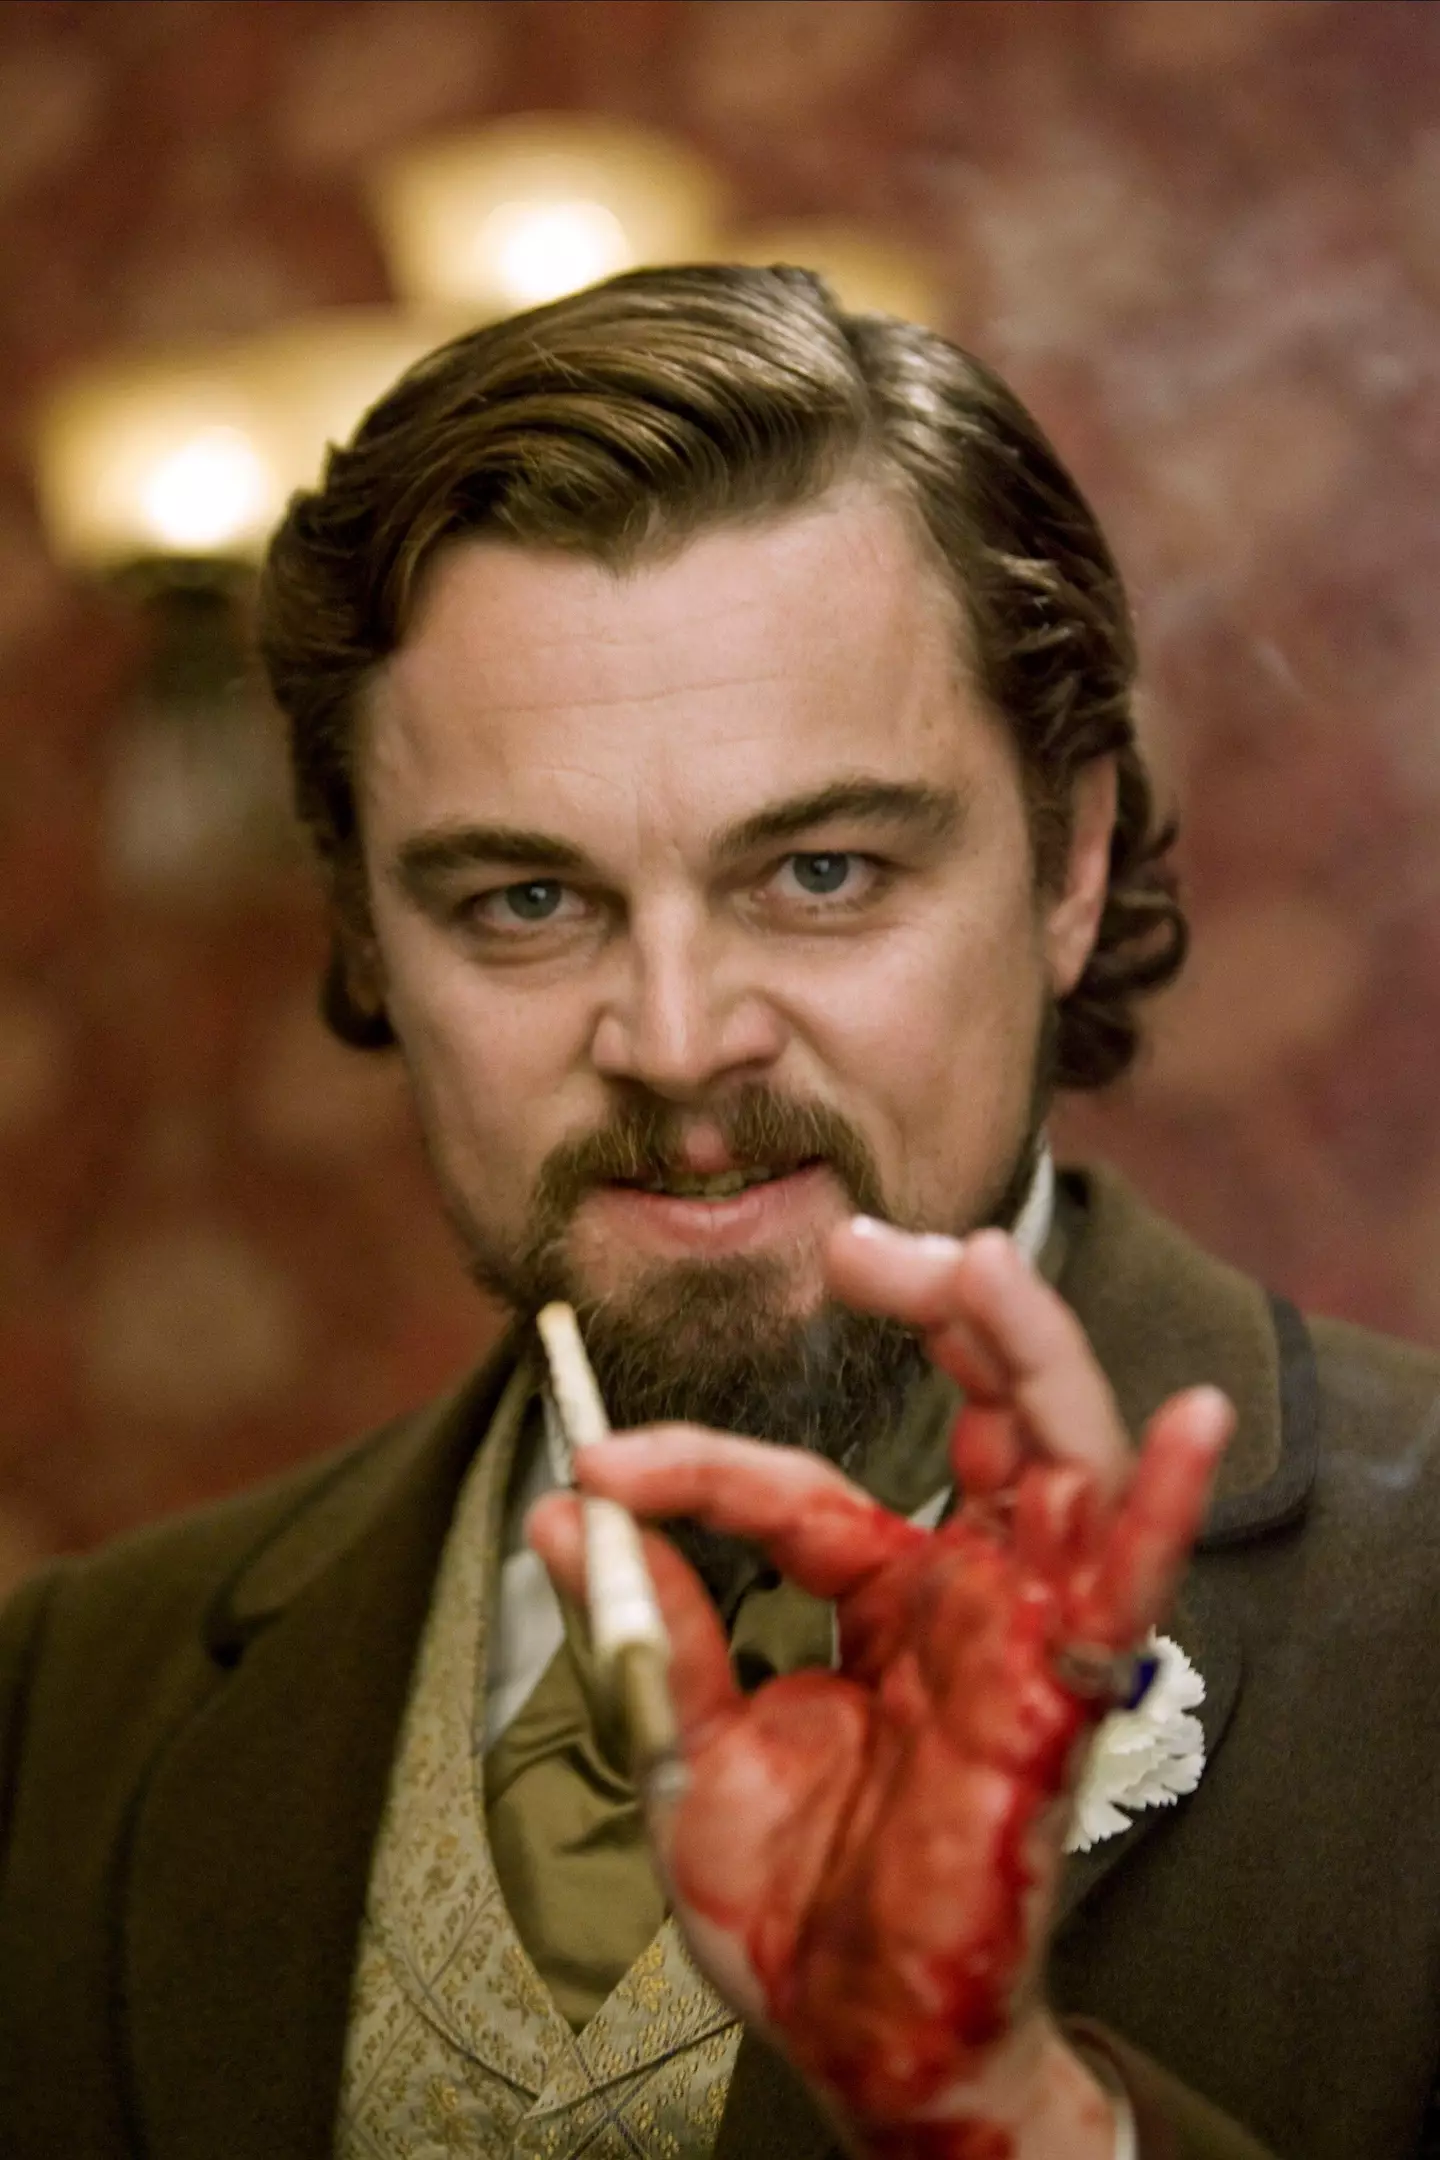 DiCaprio was unperturbed by the injury.